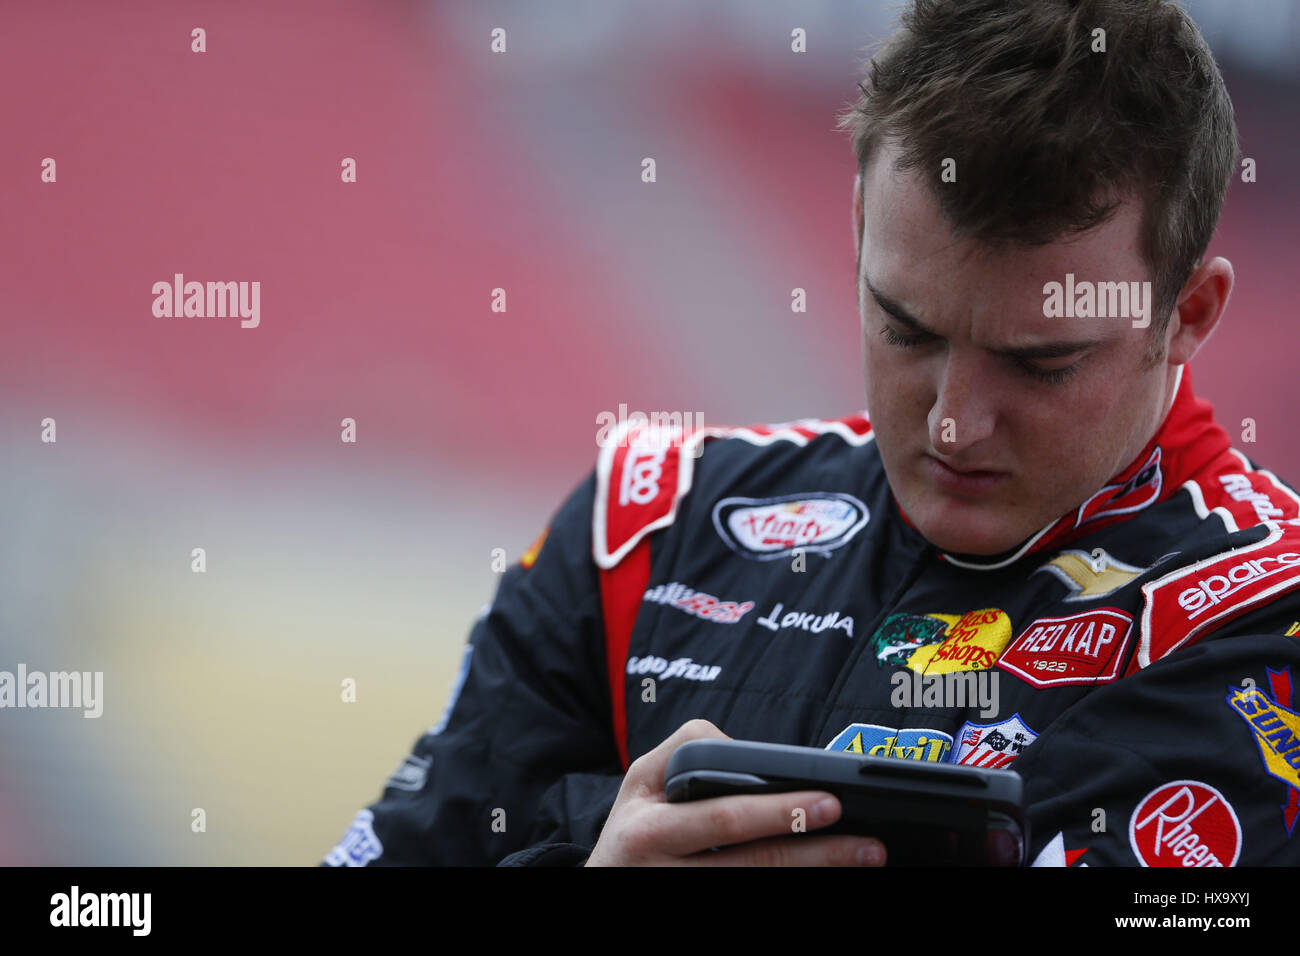 Fontana, California, USA. 25th Mar, 2017. March 25, 2017 - Fontana, California, USA: Ty Dillon (3) hangs out on pit road during qualifying for the NASCAR Xfinity Series NXS 300 at Auto Club Speedway in Fontana, California. Credit: Justin R. Noe Asp Inc/ASP/ZUMA Wire/Alamy Live News Stock Photo